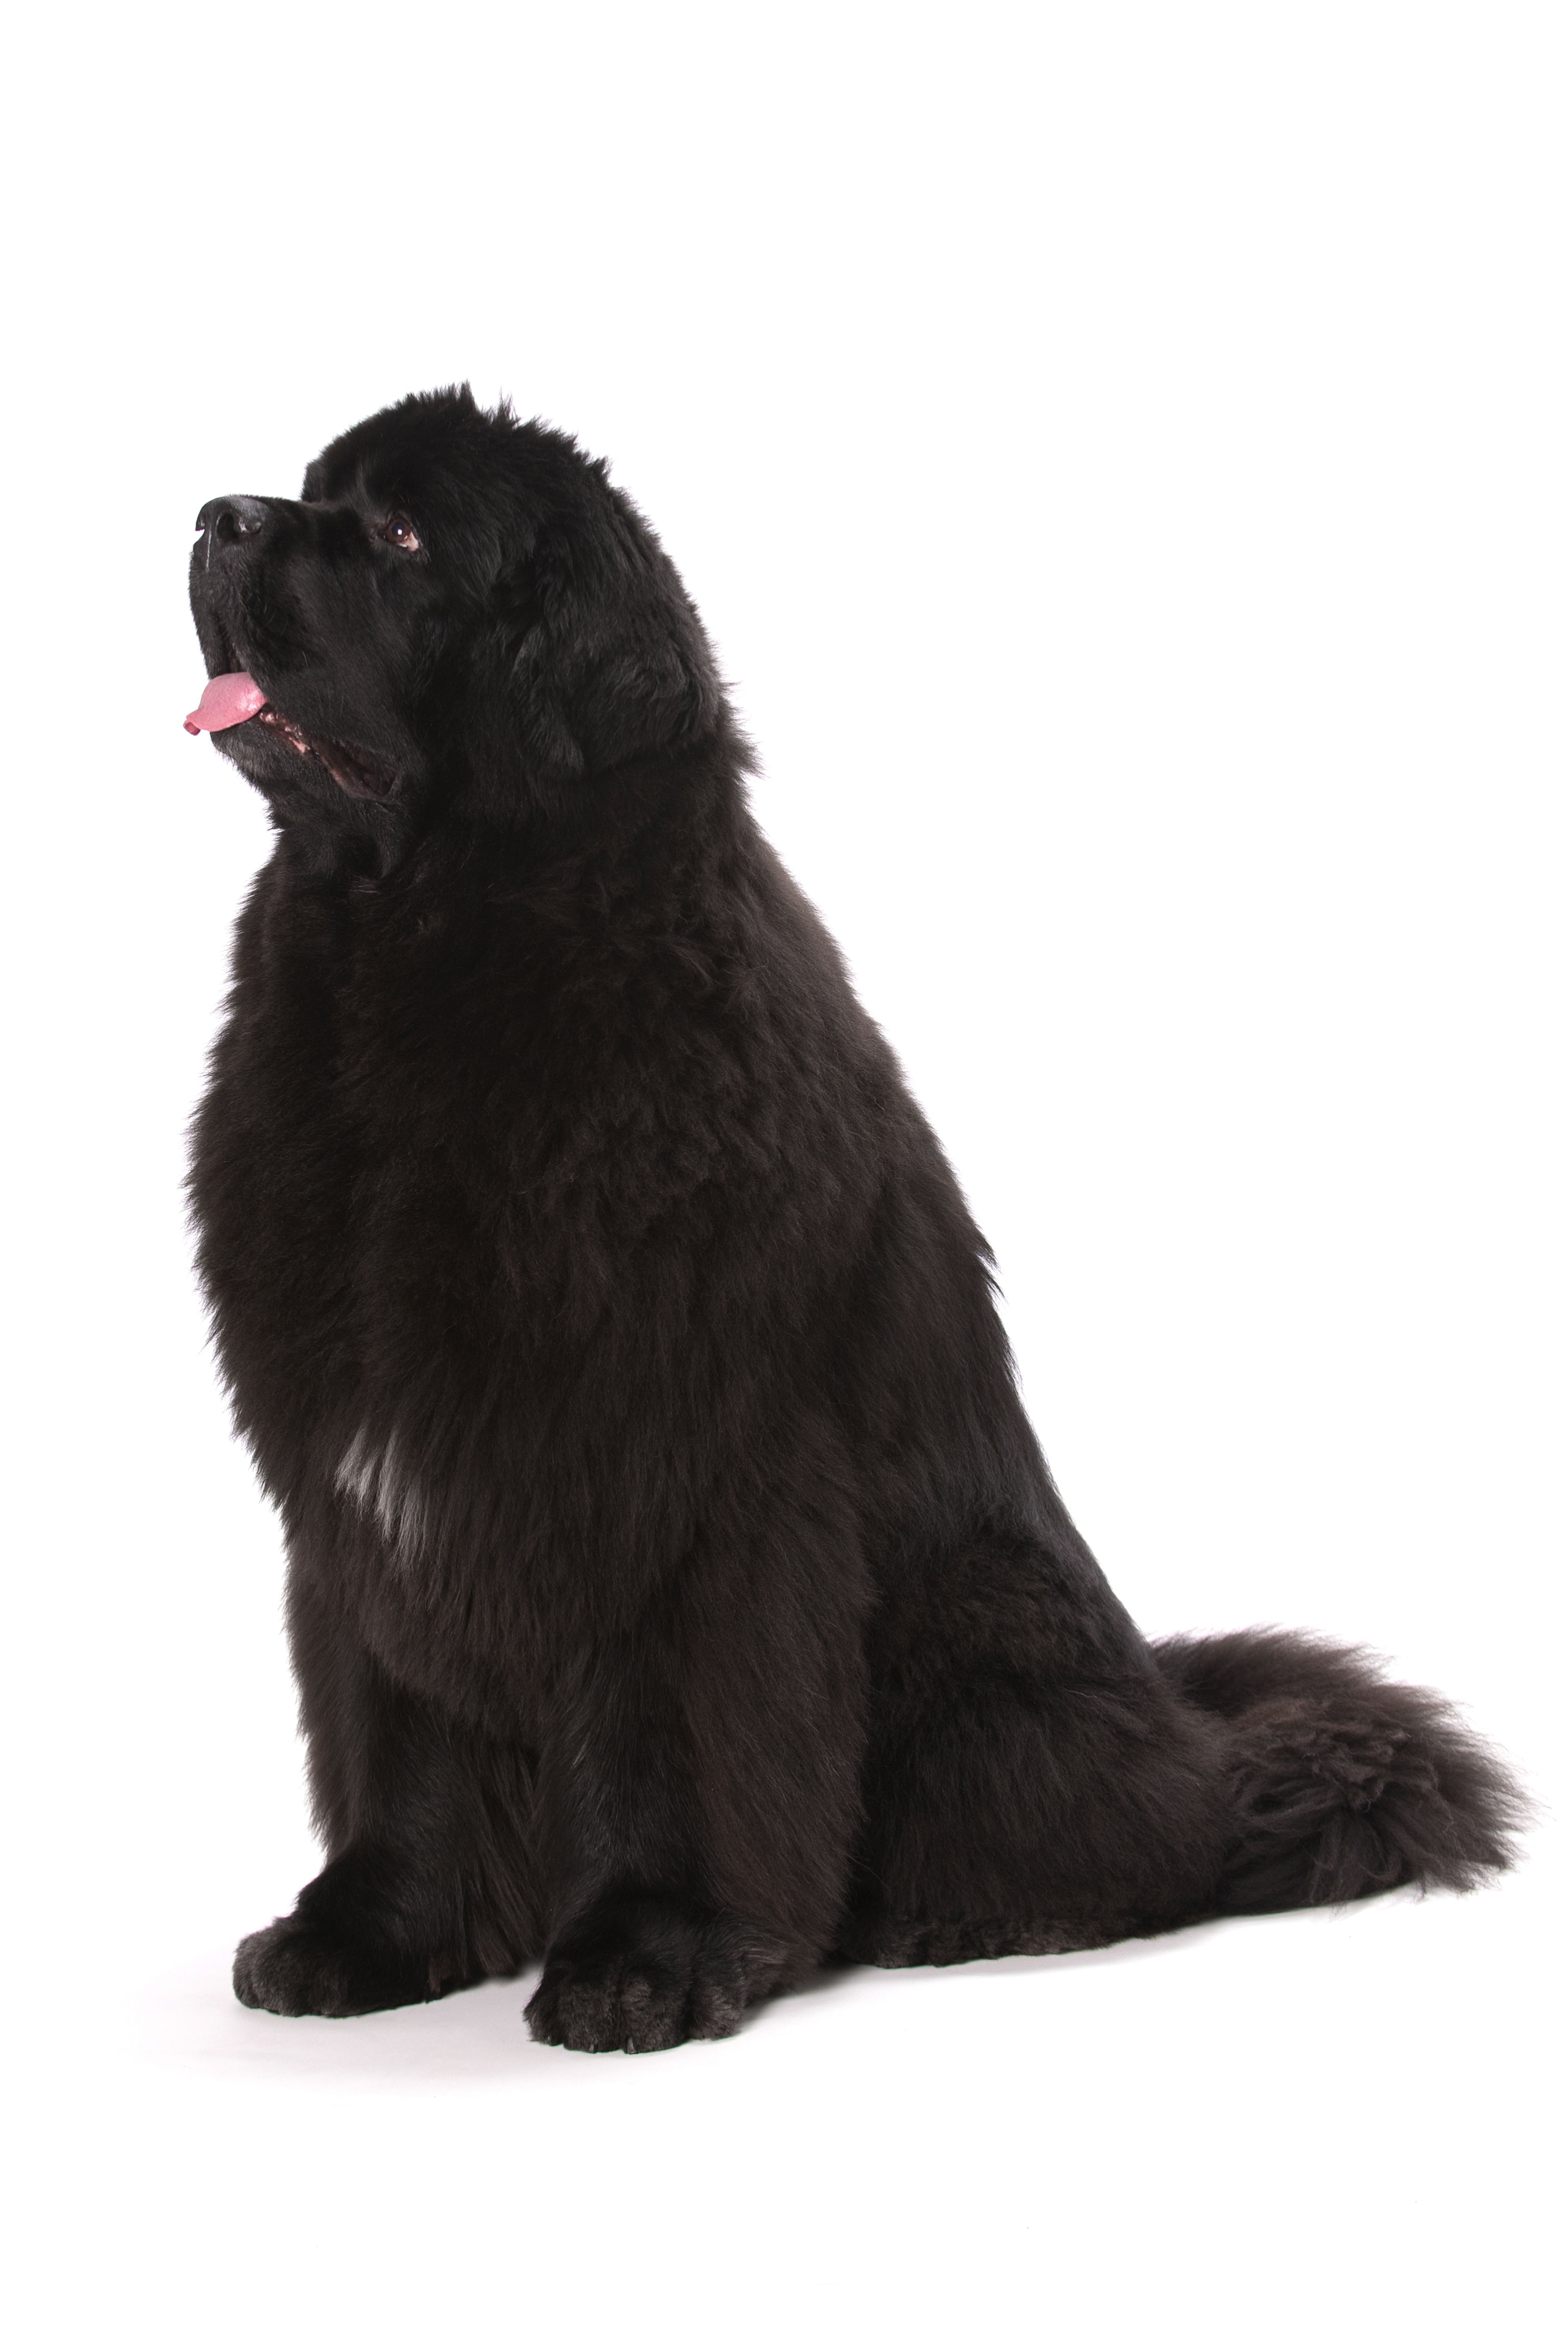 Fluffy dog breeds: From small to giant breeds